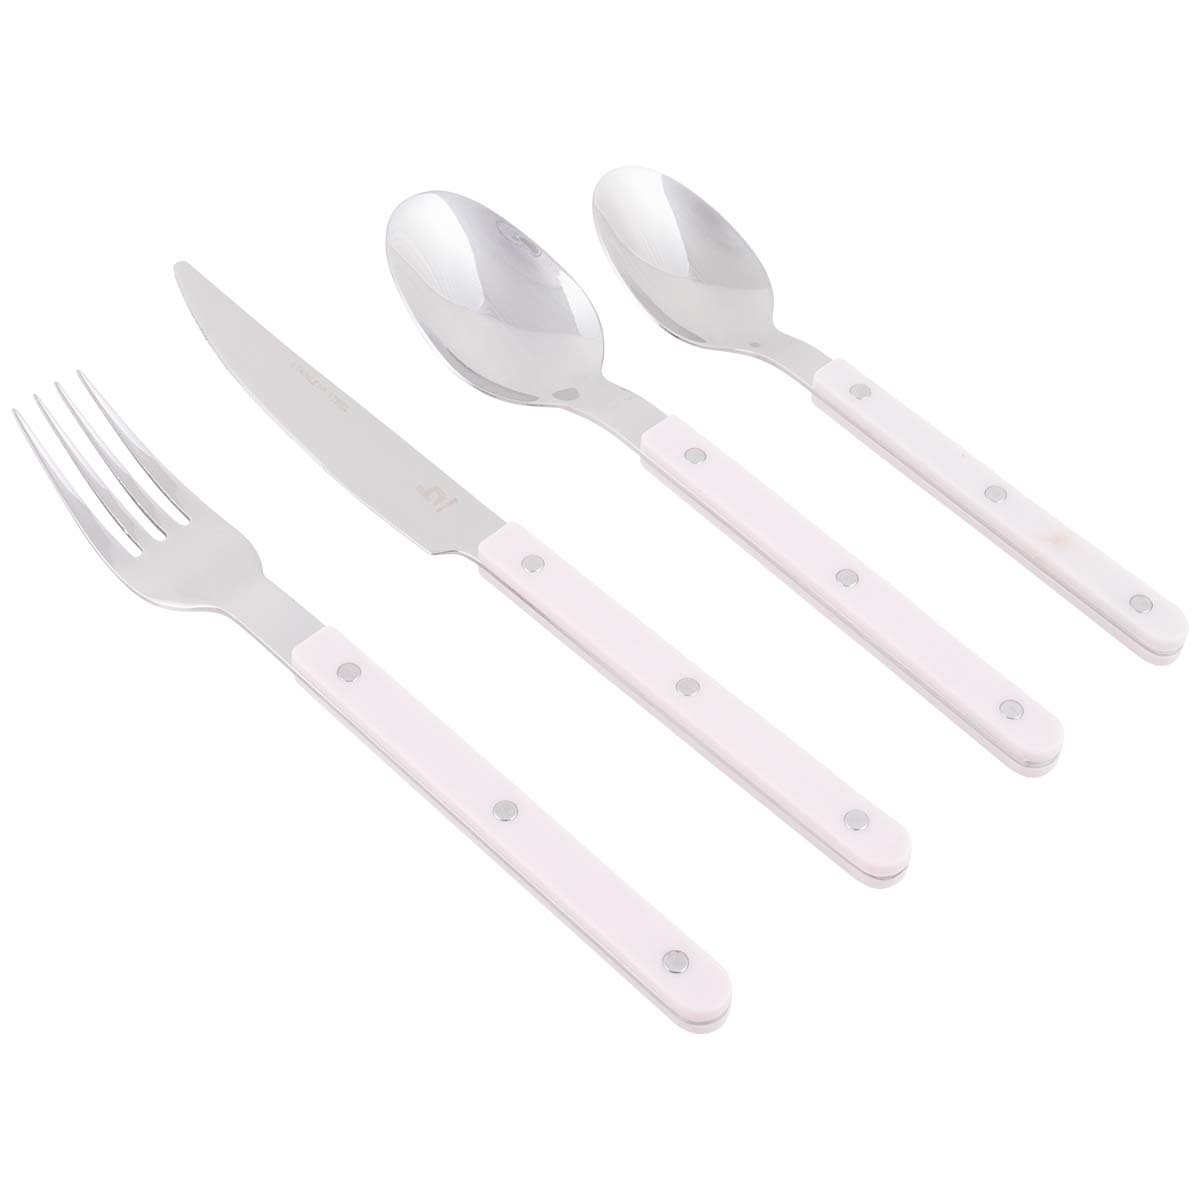 6102292 A colorful 16-piece cutlery set. This practical set is suitable for 4 people and consists of 4 knives, 4 forks, 4 spoons and 4 small (tea) spoons. Made of stainless steel with a plastic handle, which gives the set a long product life.